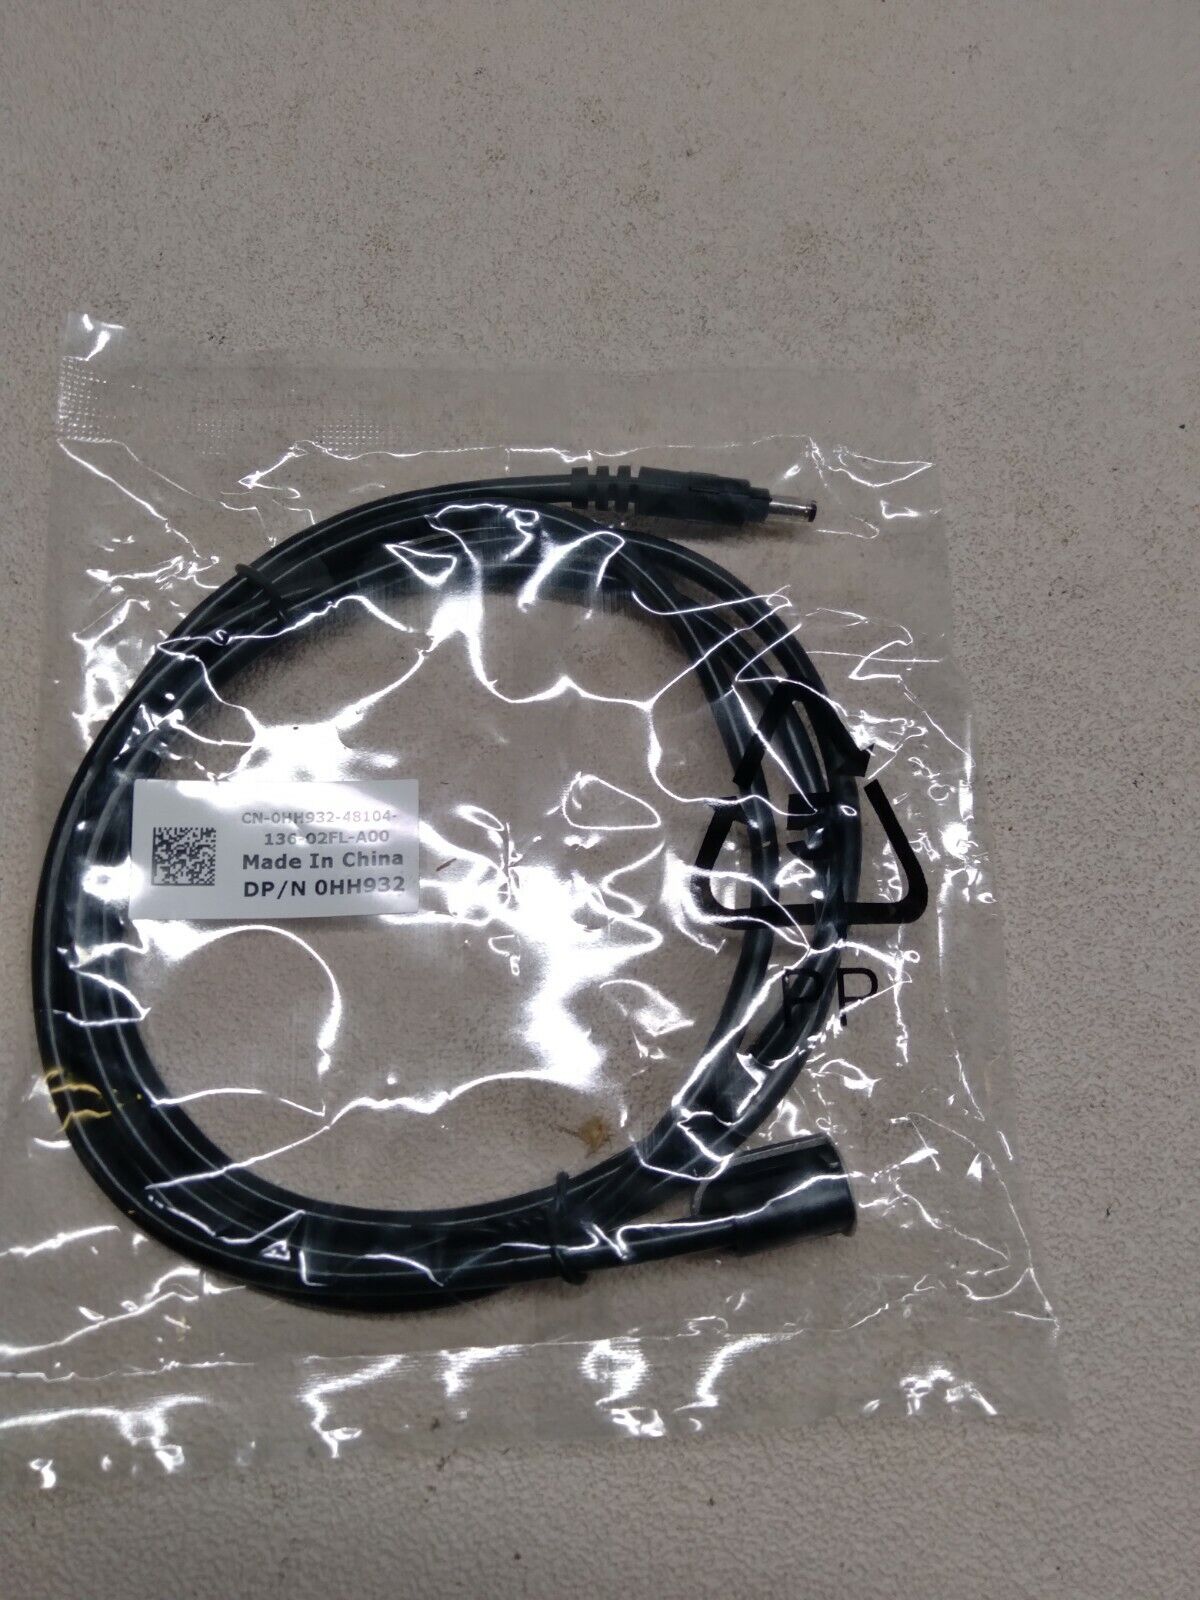 DELL 0HH932 Status Indicator LED Lead Cable for PowerEdge Servers